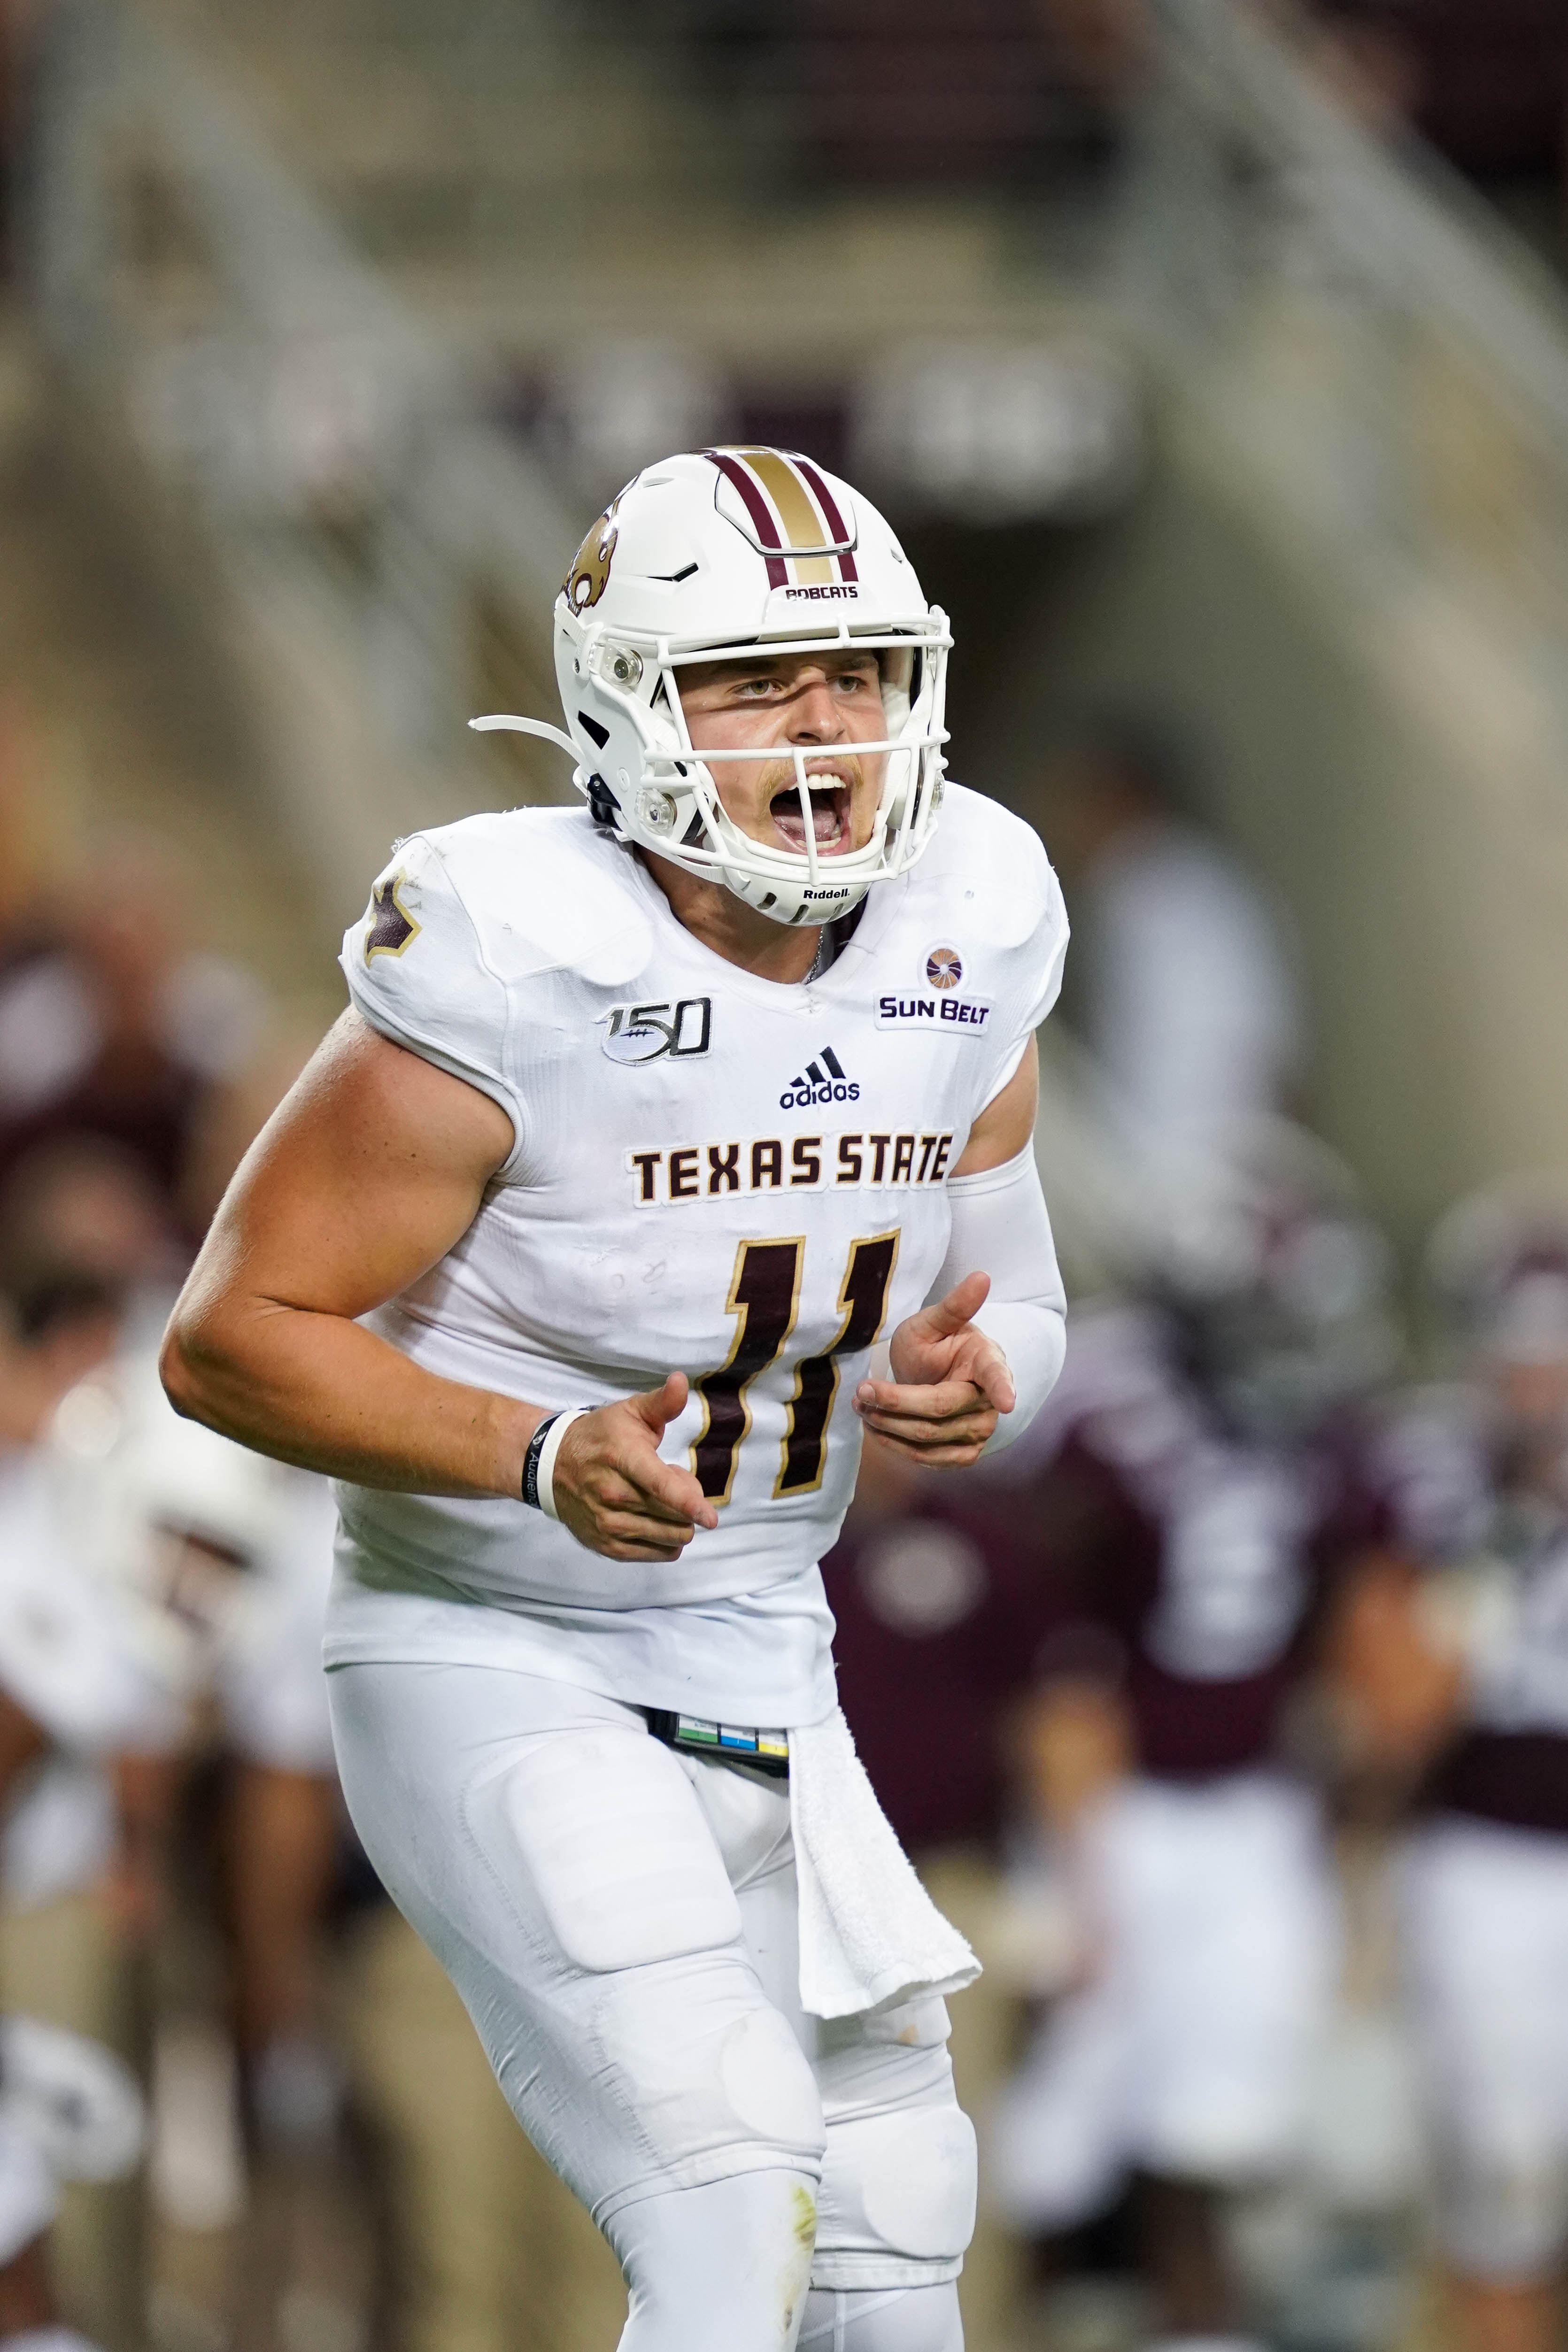 COLLEGE FOOTBALL: AUG 29 Texas State at Texas A&amp;M